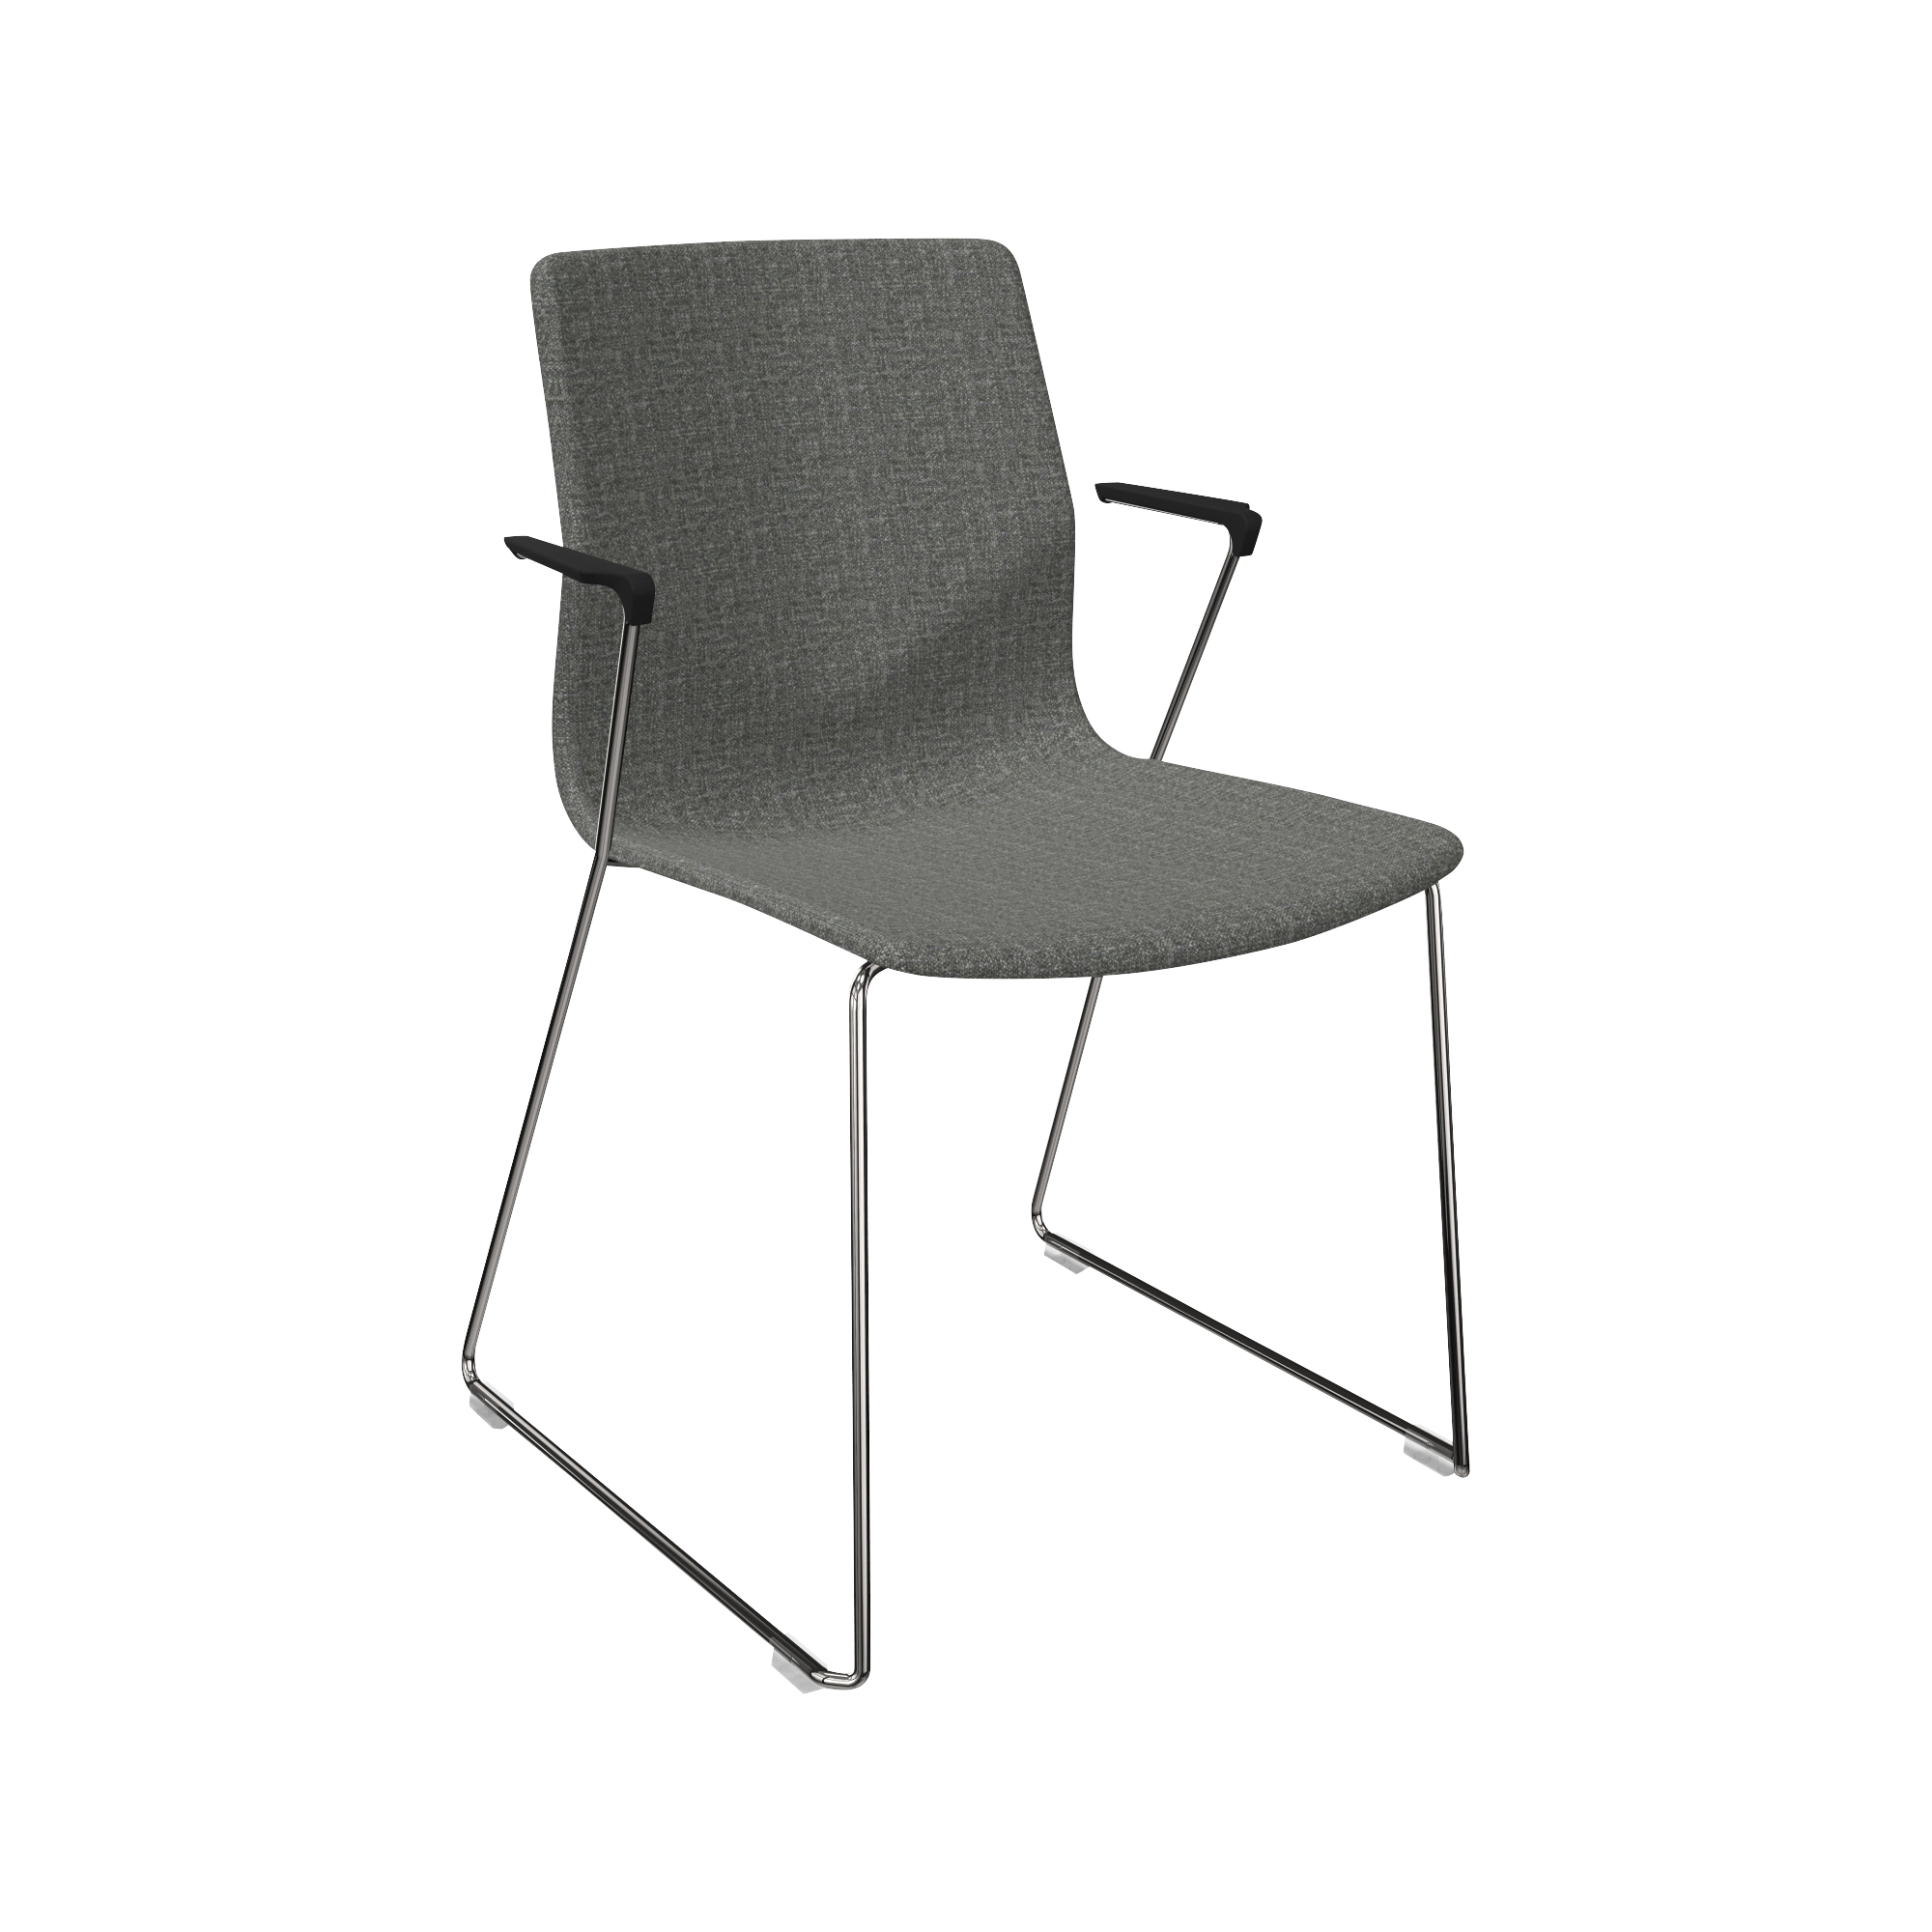 A grey upholstered chair with a metal frame.